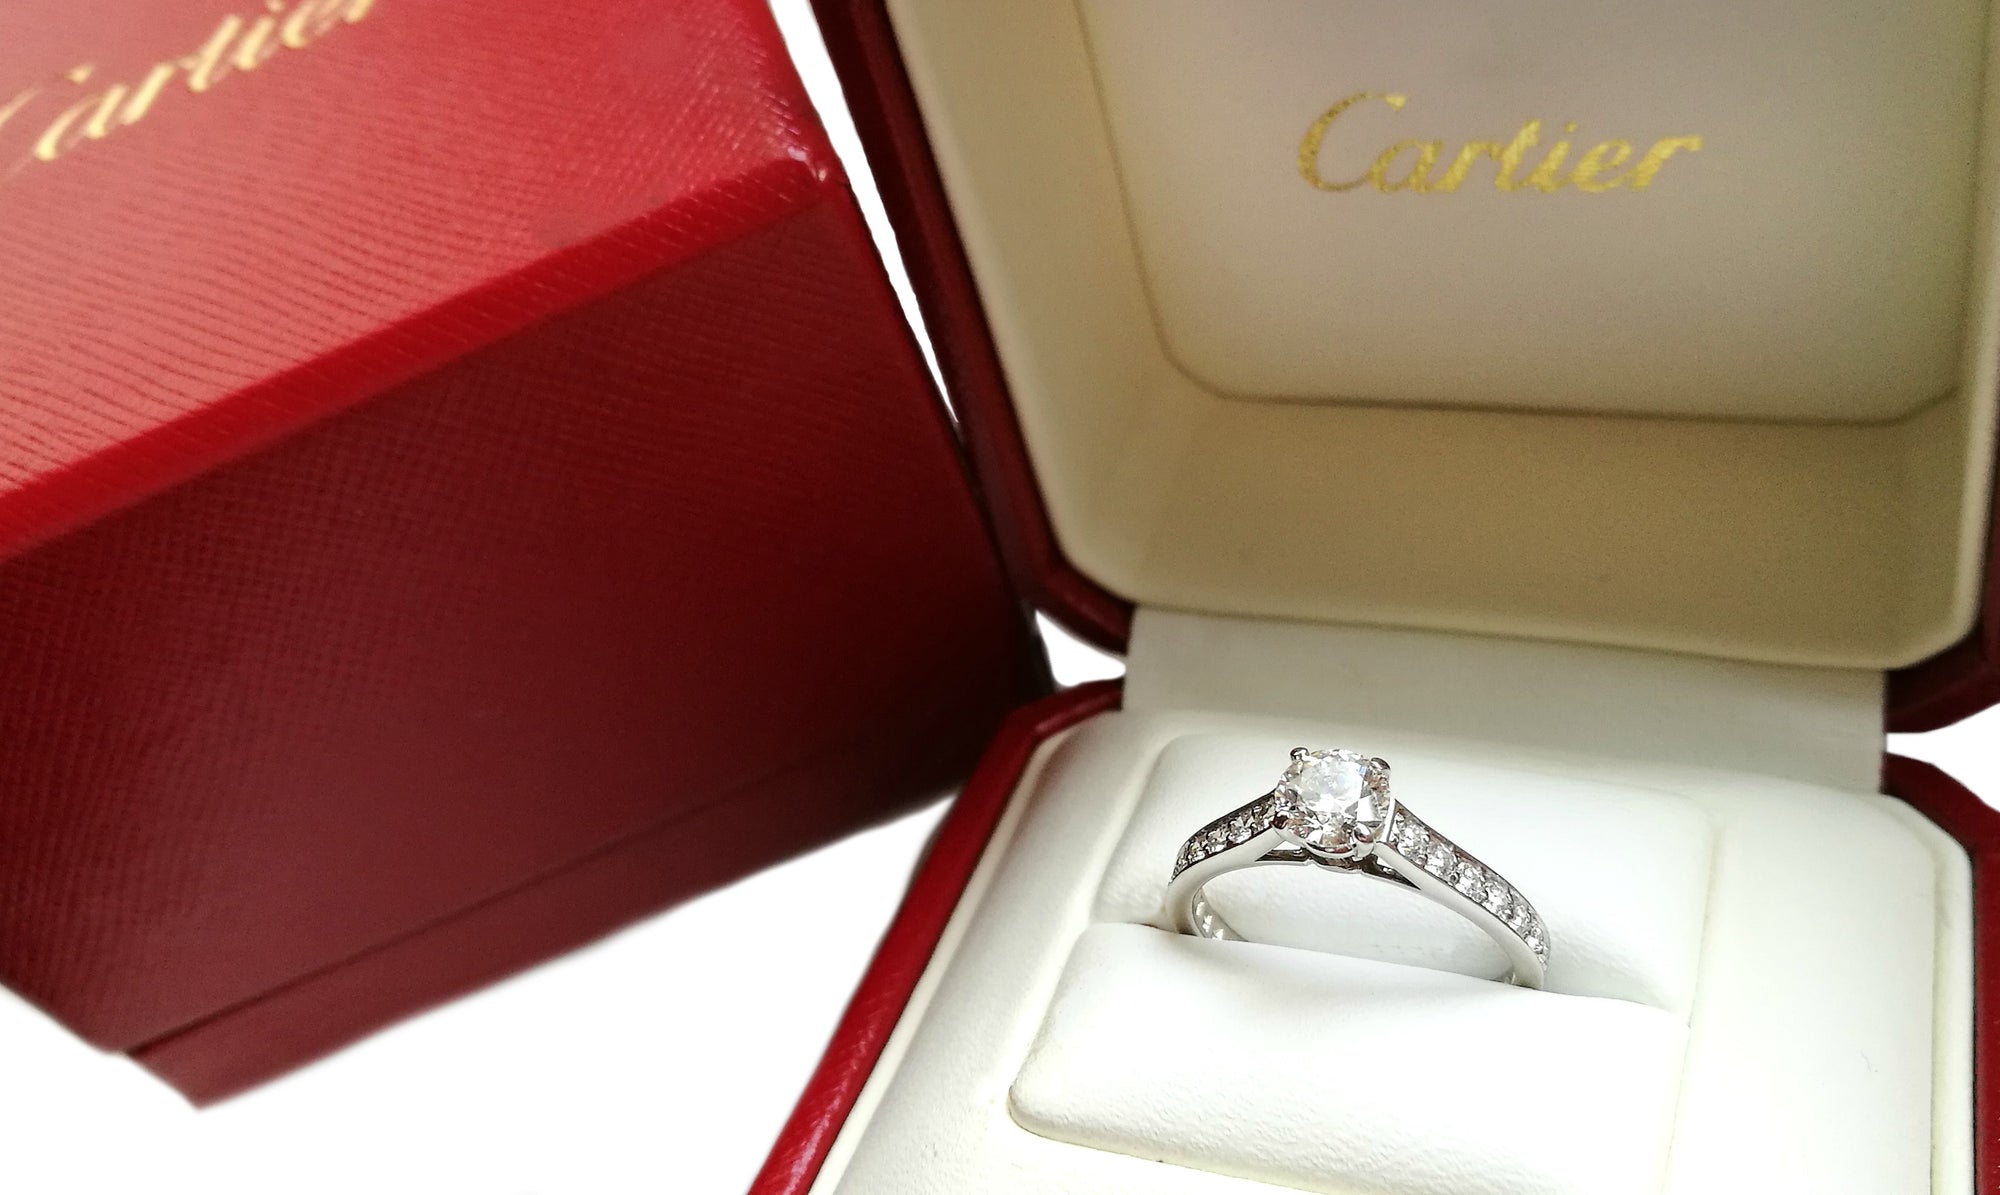 Cartier 1895 0.55ct H/VS1 Diamond Engagement Ring with Paved Platinum Band